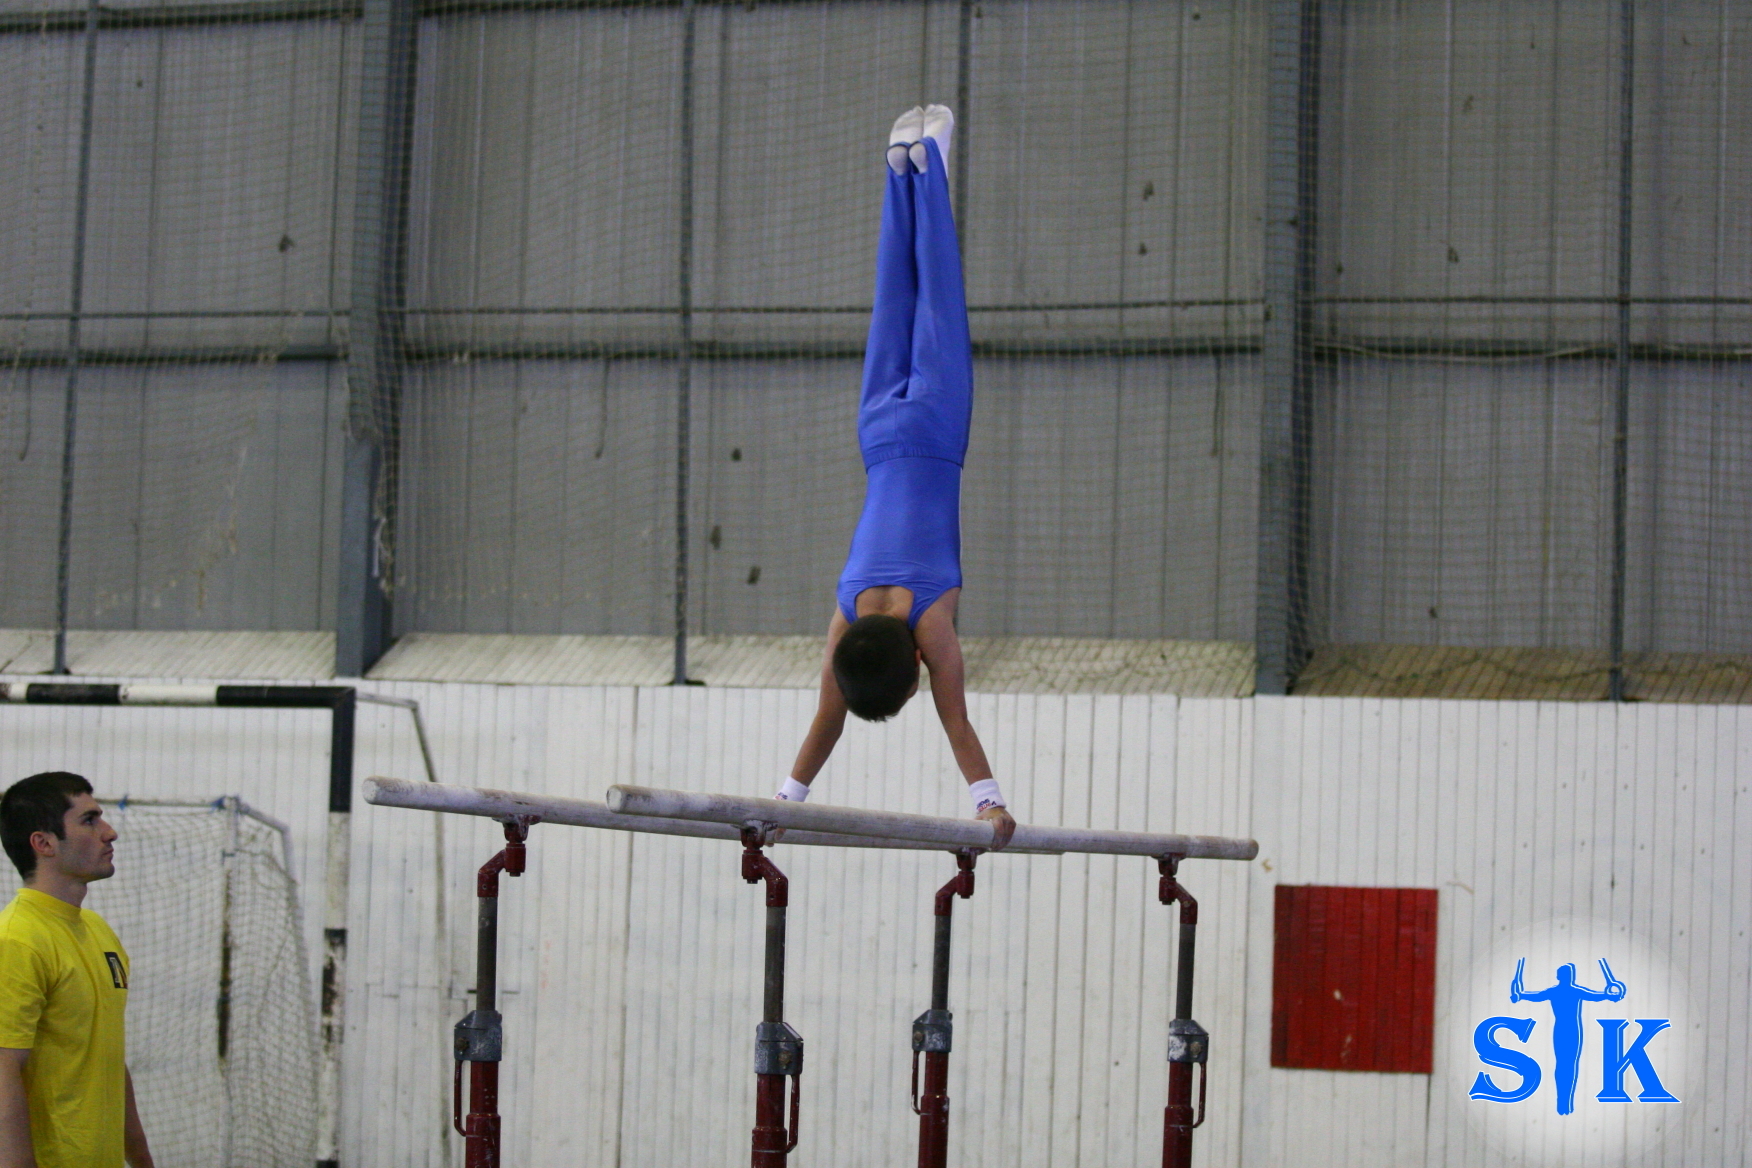 5th place on parallel bars (David Shaumian)